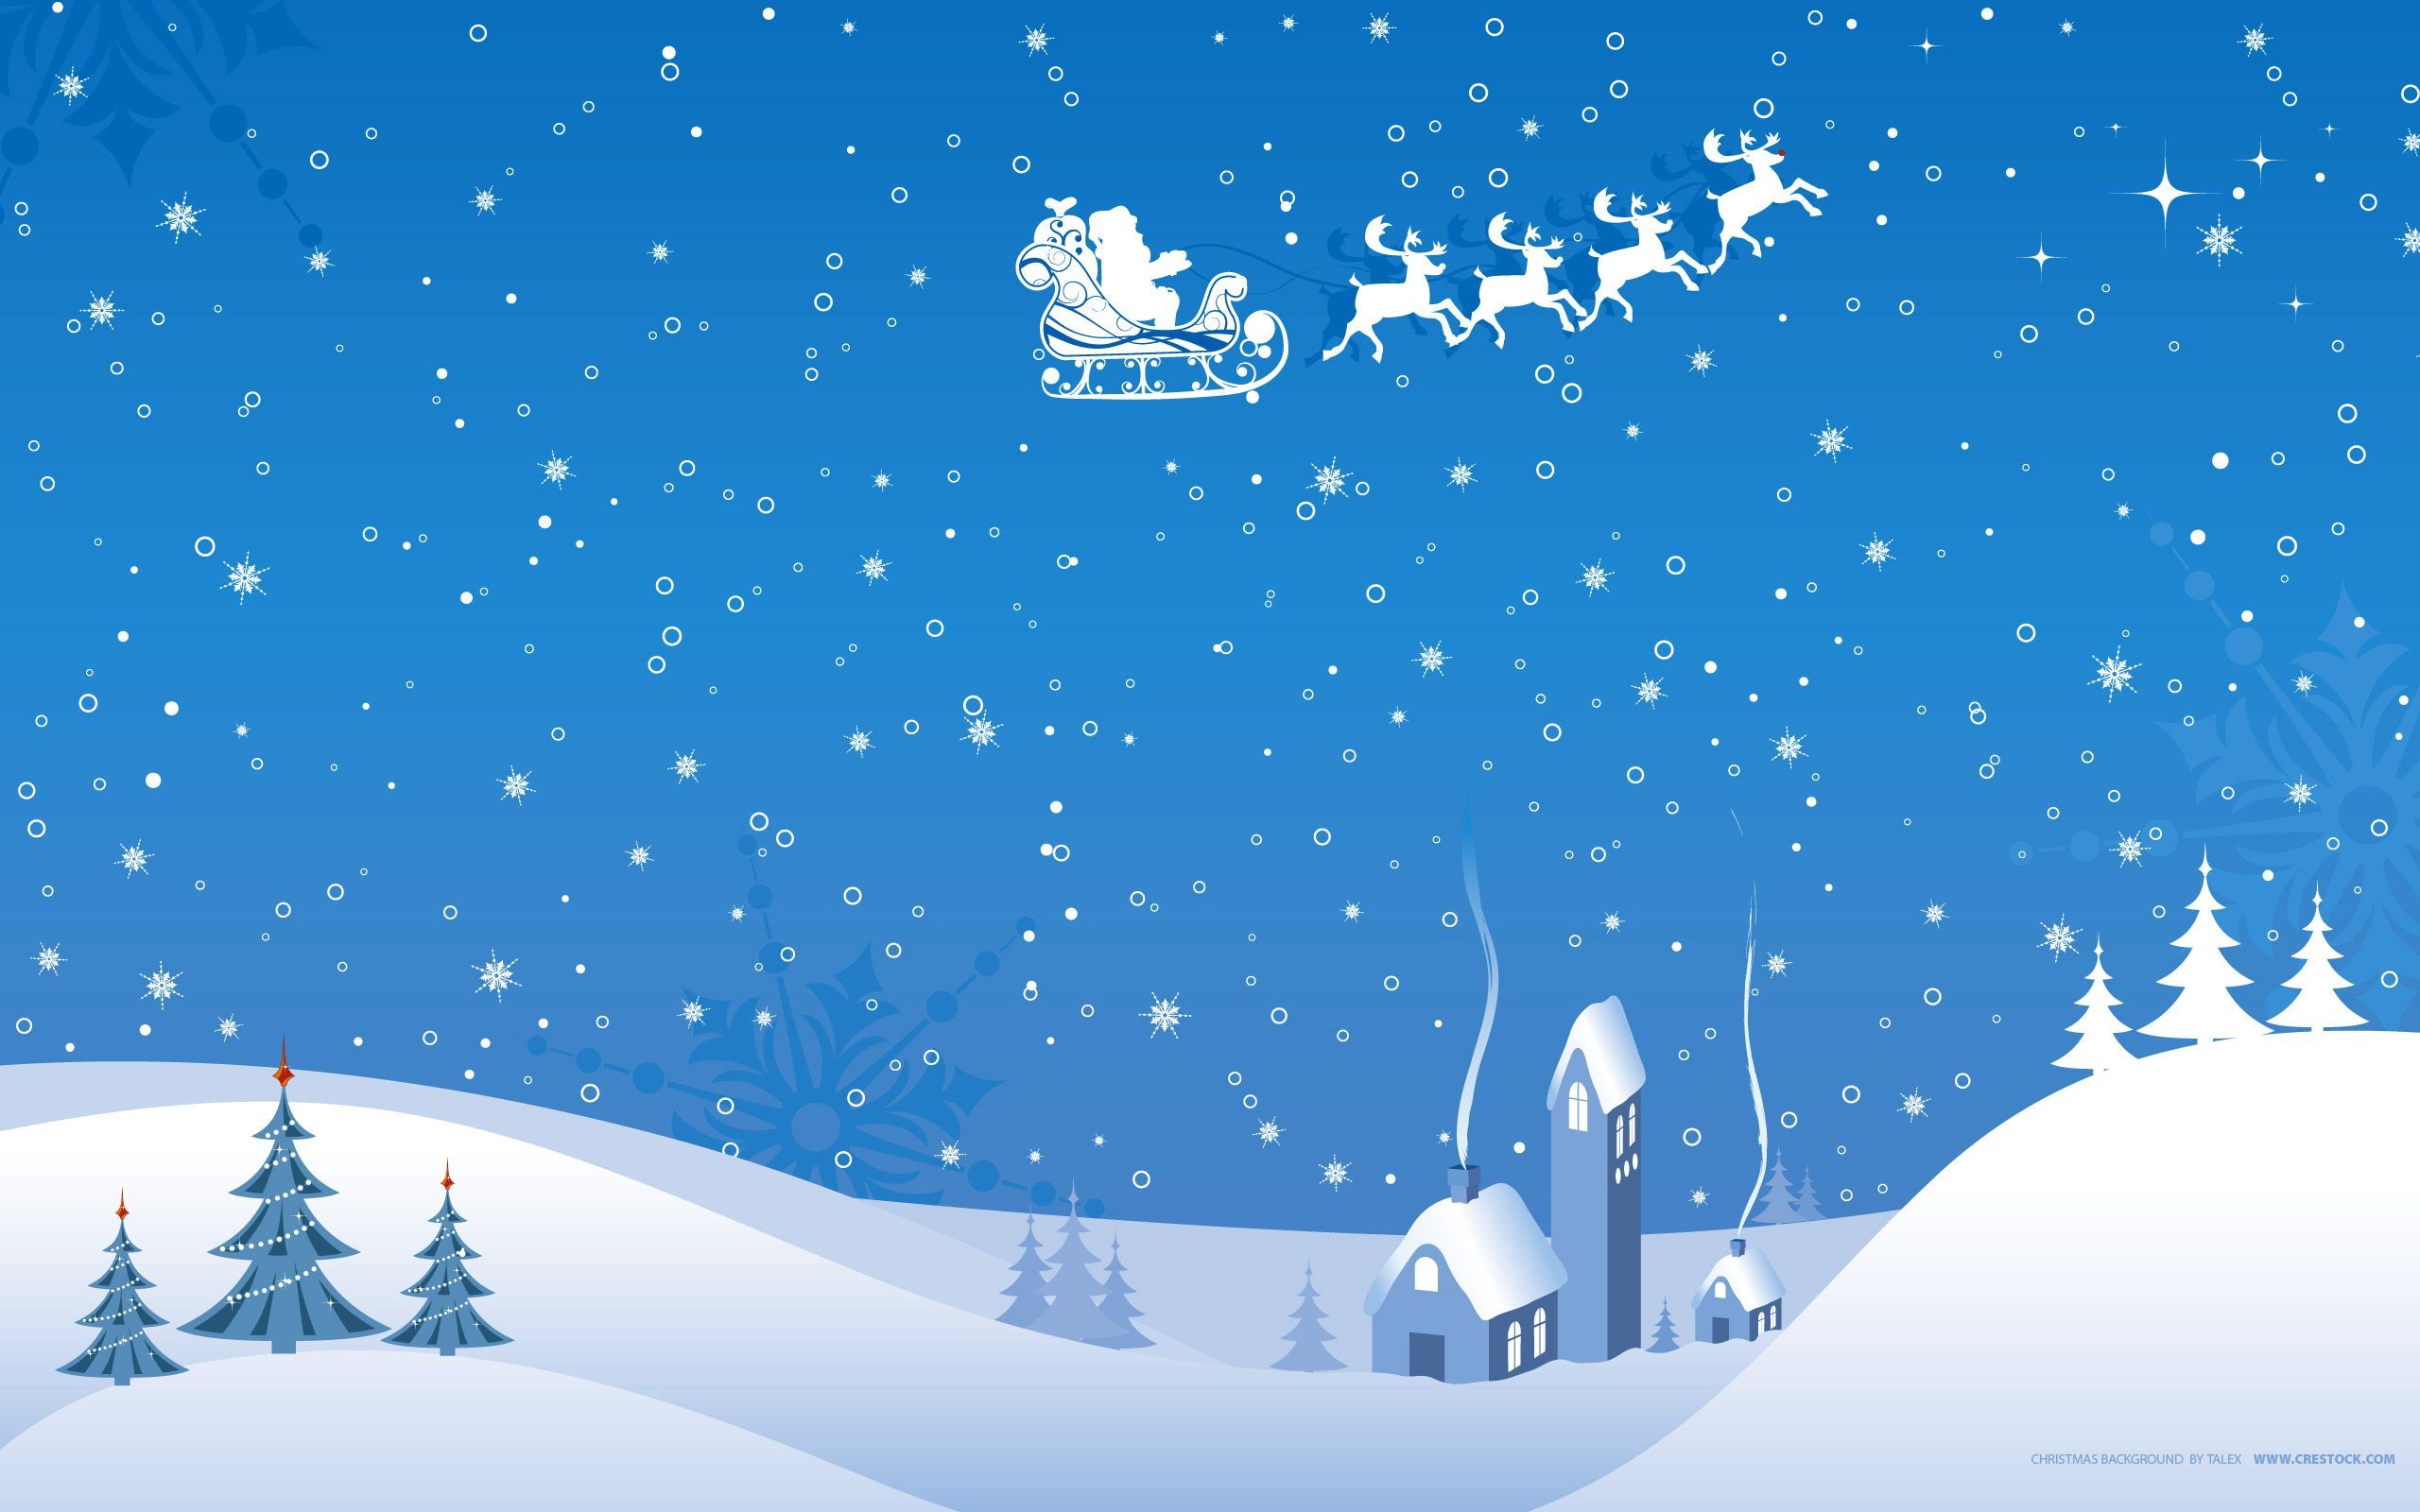 45 Exceptional Widescreen Christmas Wallpapers